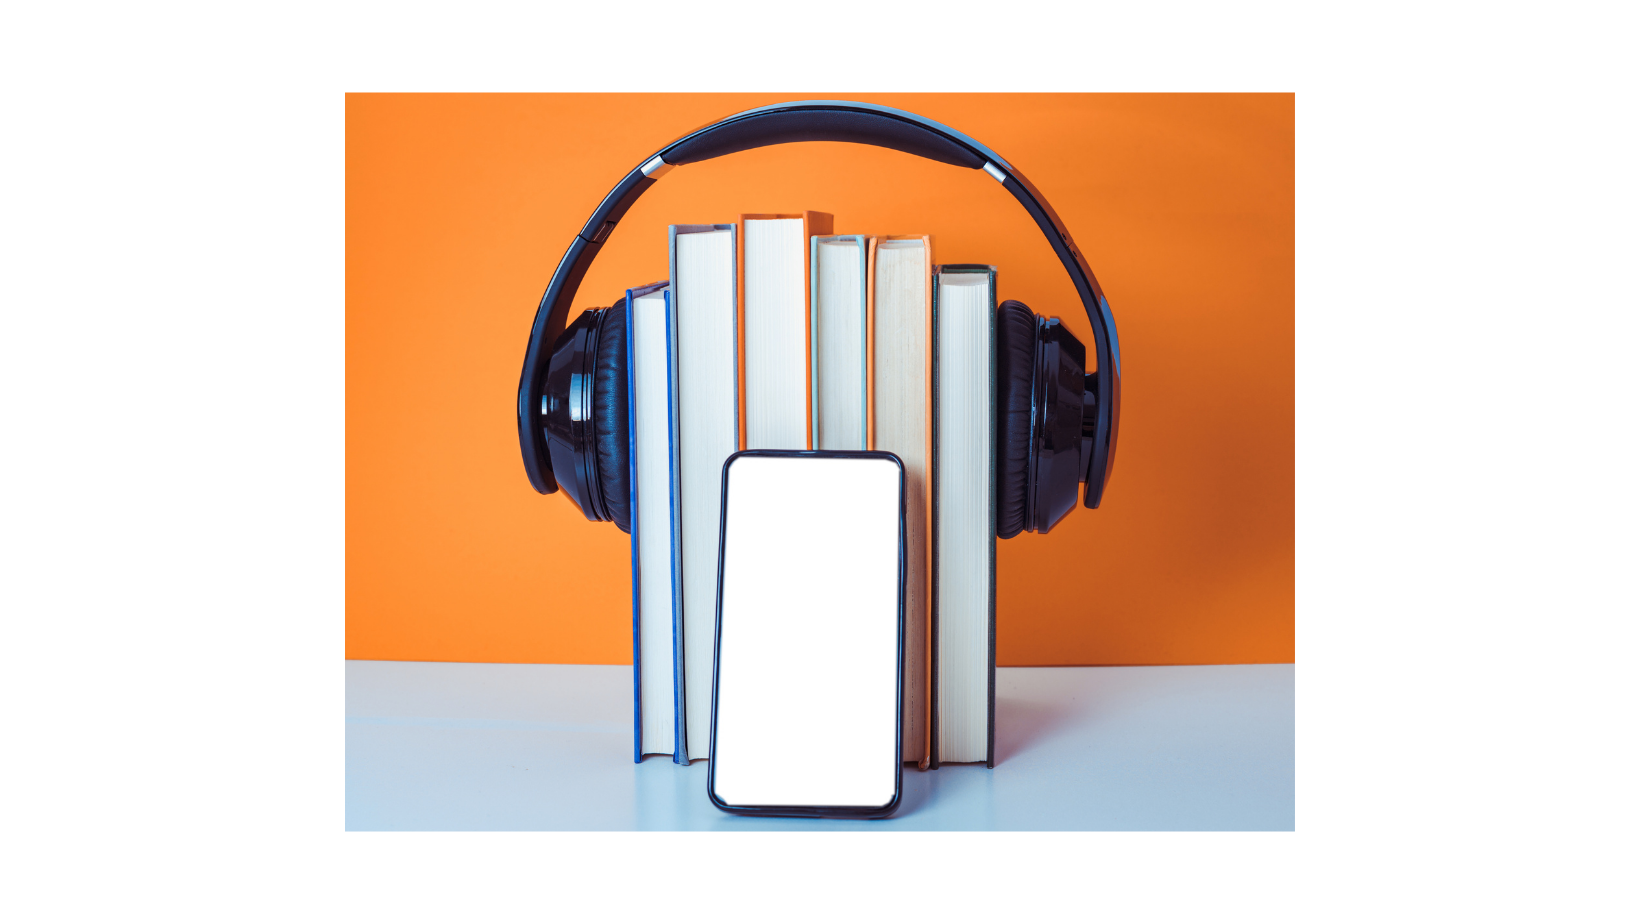 Check Out the Latest Audio Books